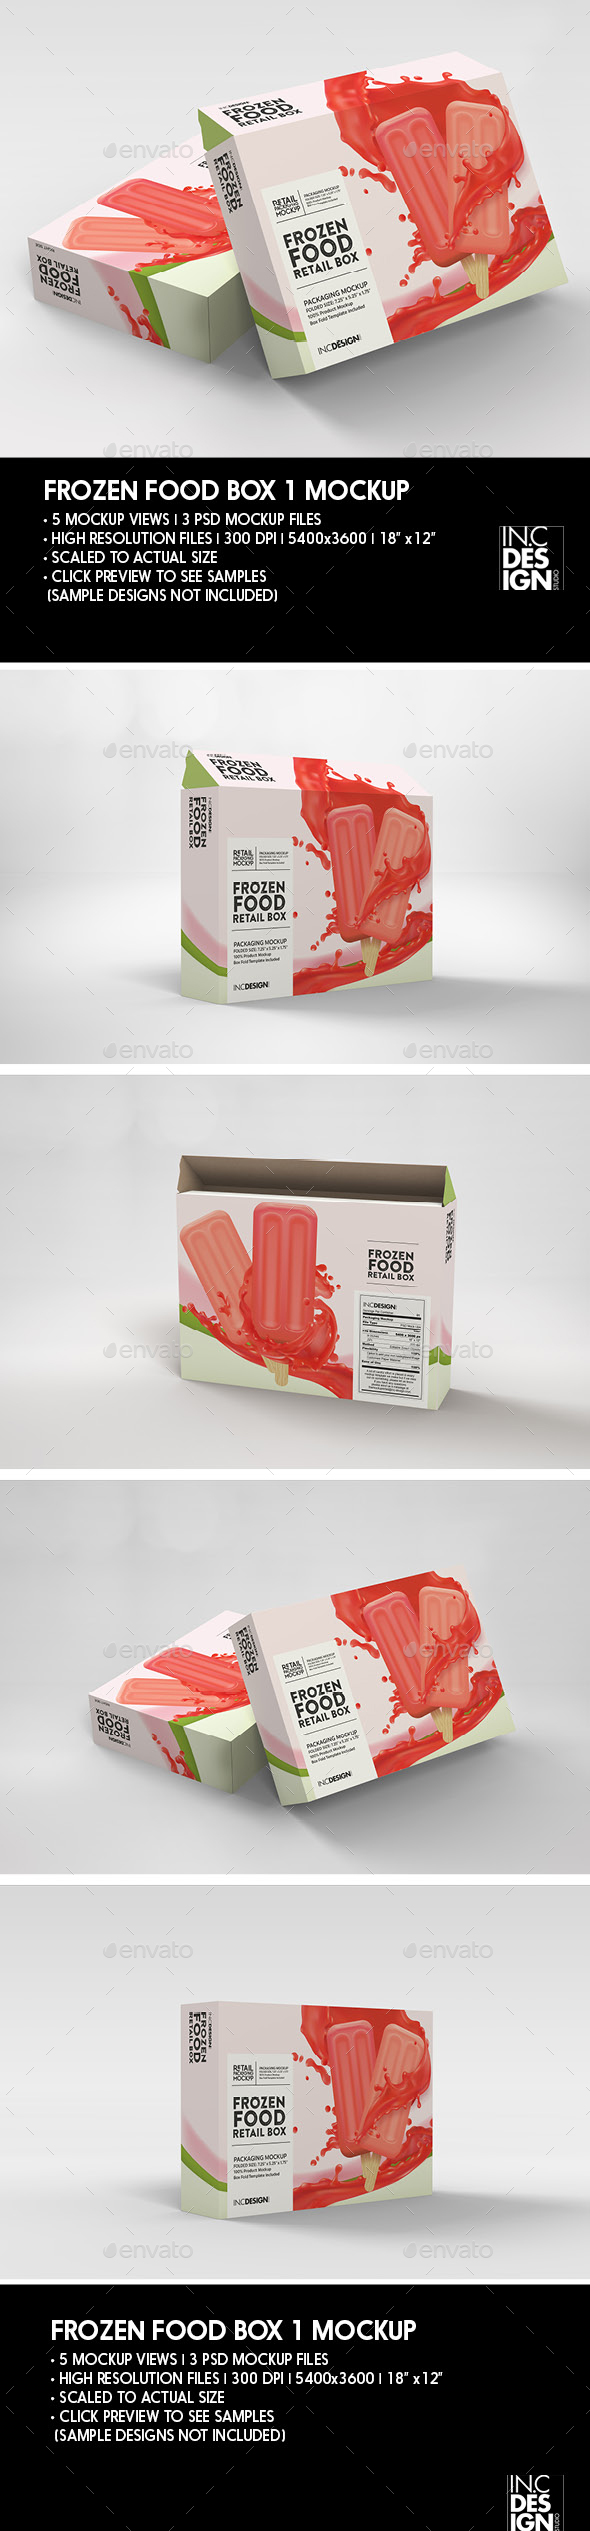 Food Container Mockup Collection  Food containers, Food, Frozen